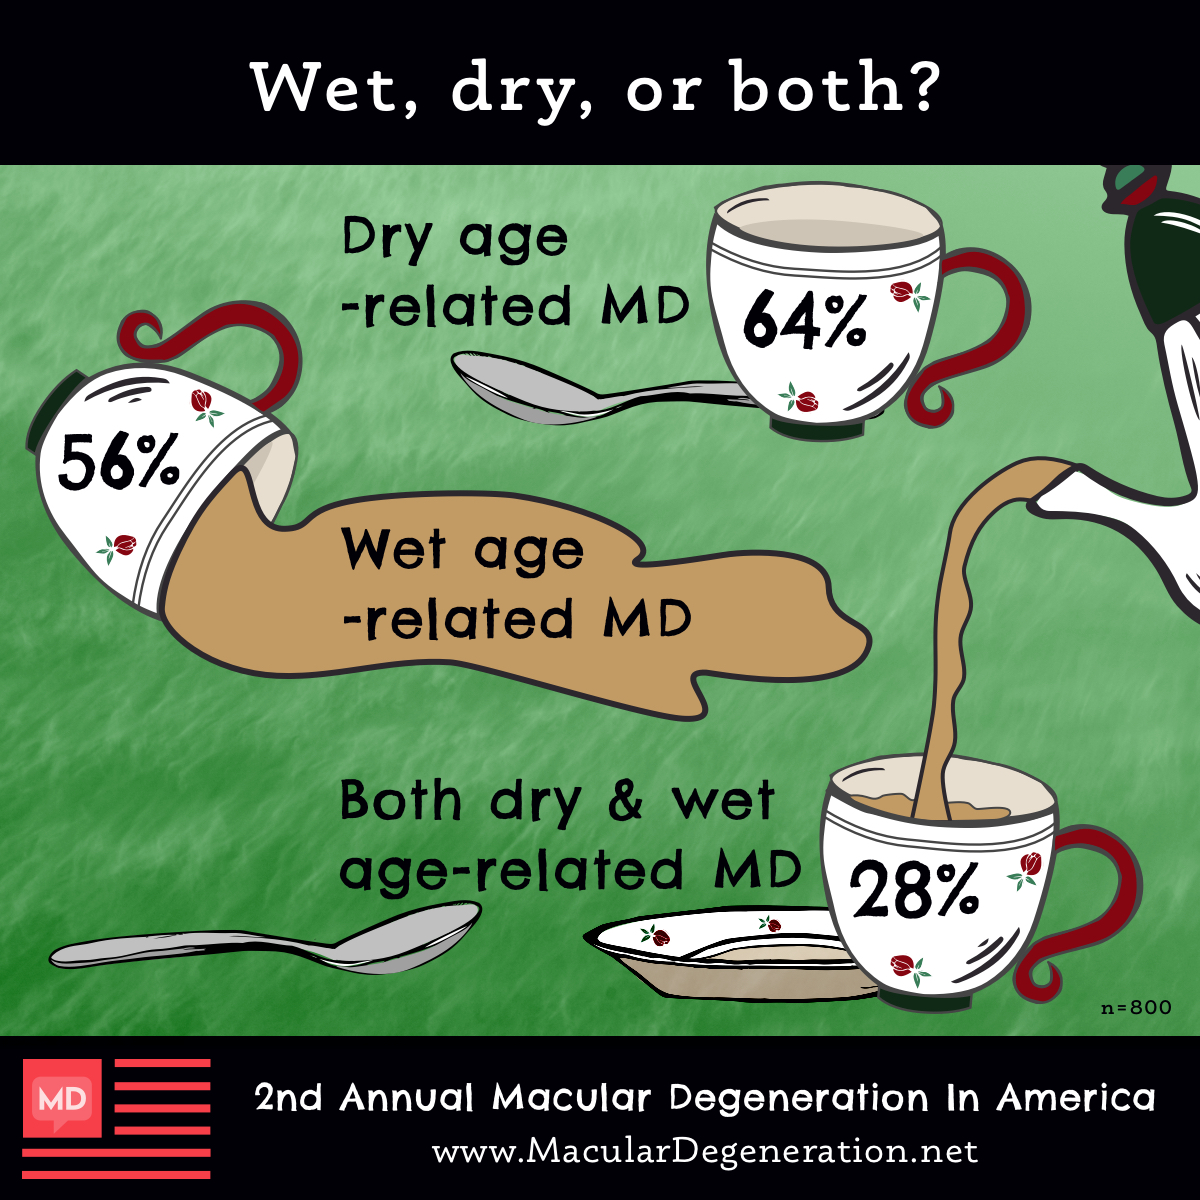 64% of respondents of the macular degeneration In America survey have dry AMD, 56% have wet AMD, and 28% have both dry and wet.